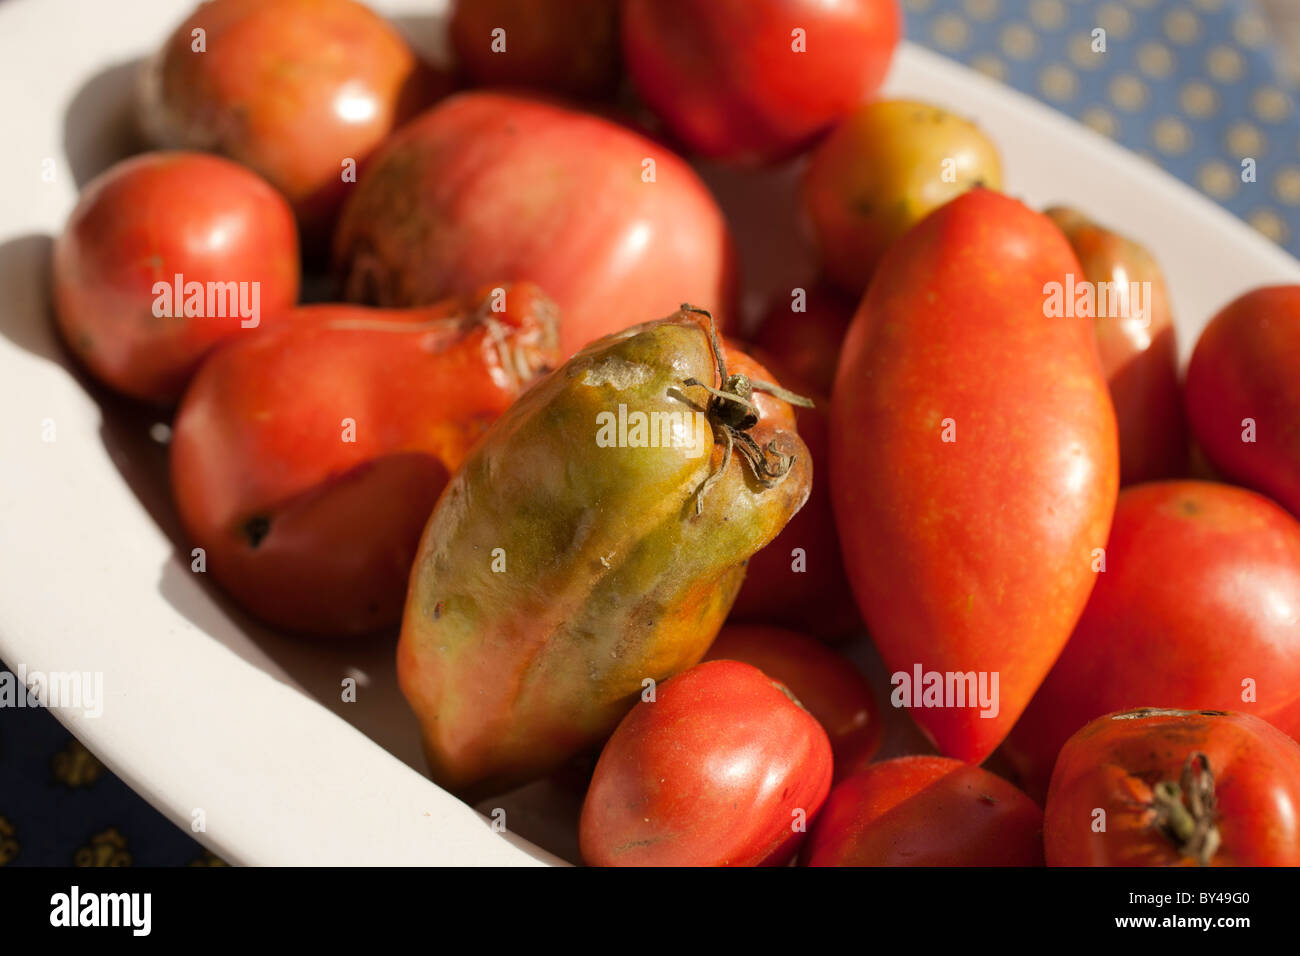 Plate of rotten tomatoes Stock Photo